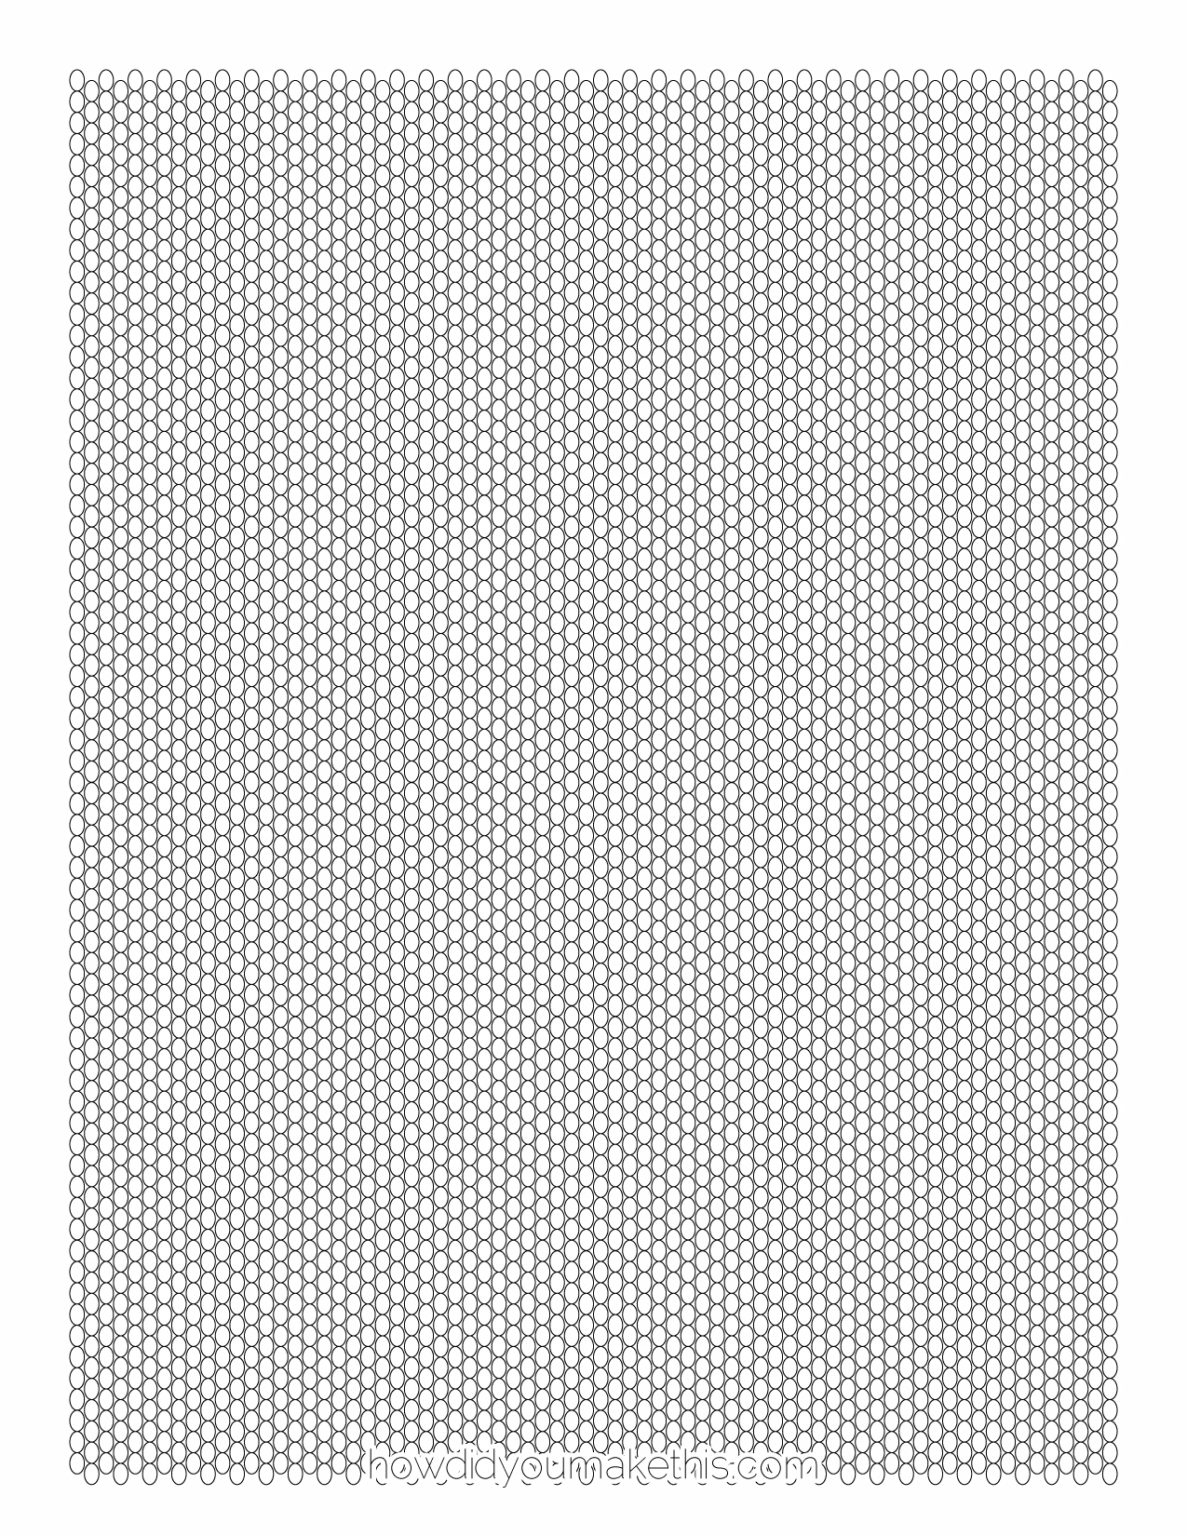 Free Printable Seed Bead Graph Paper Template In PDF